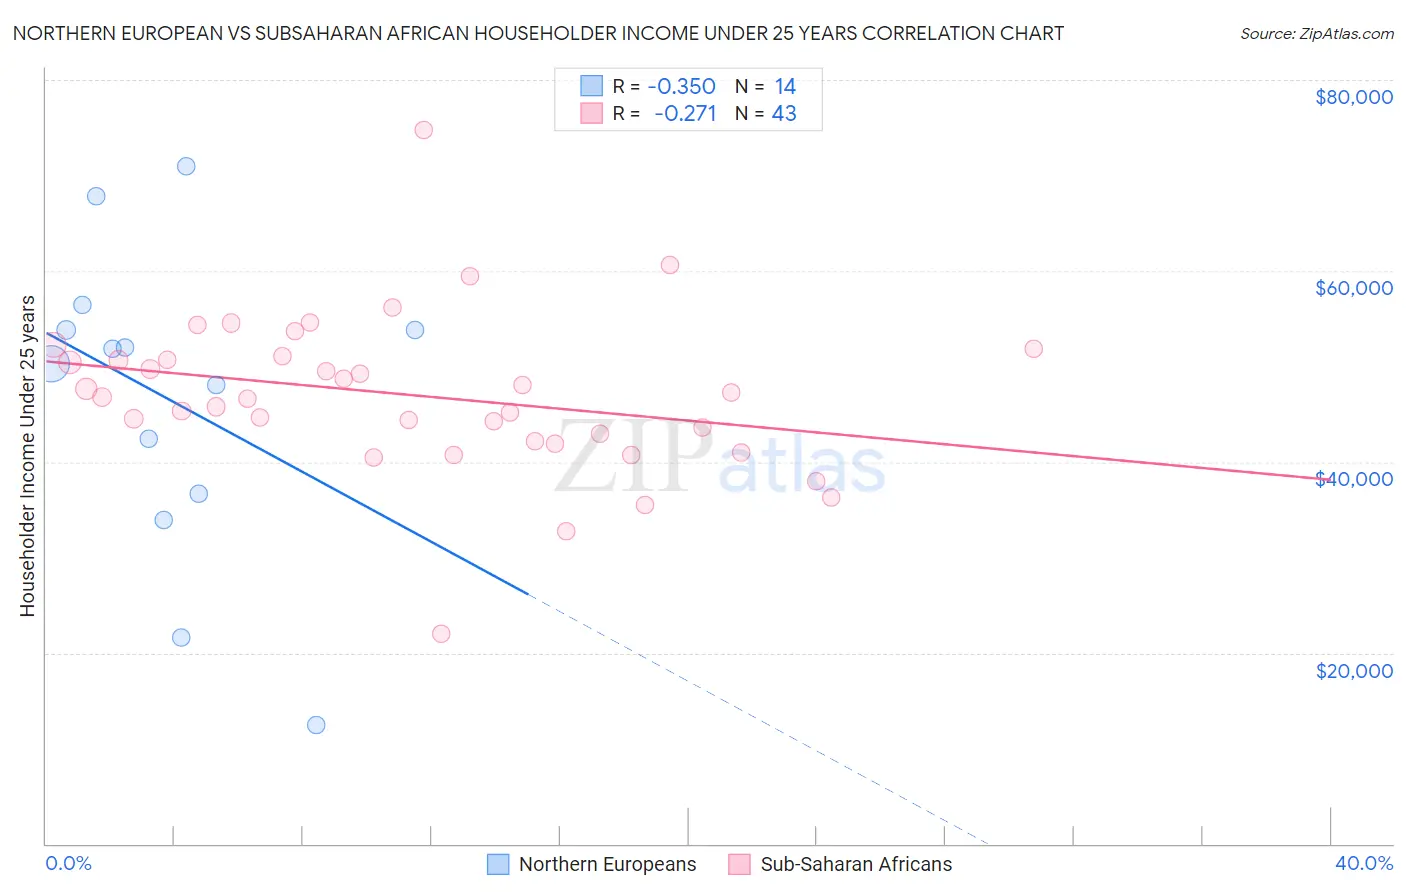 Northern European vs Subsaharan African Householder Income Under 25 years